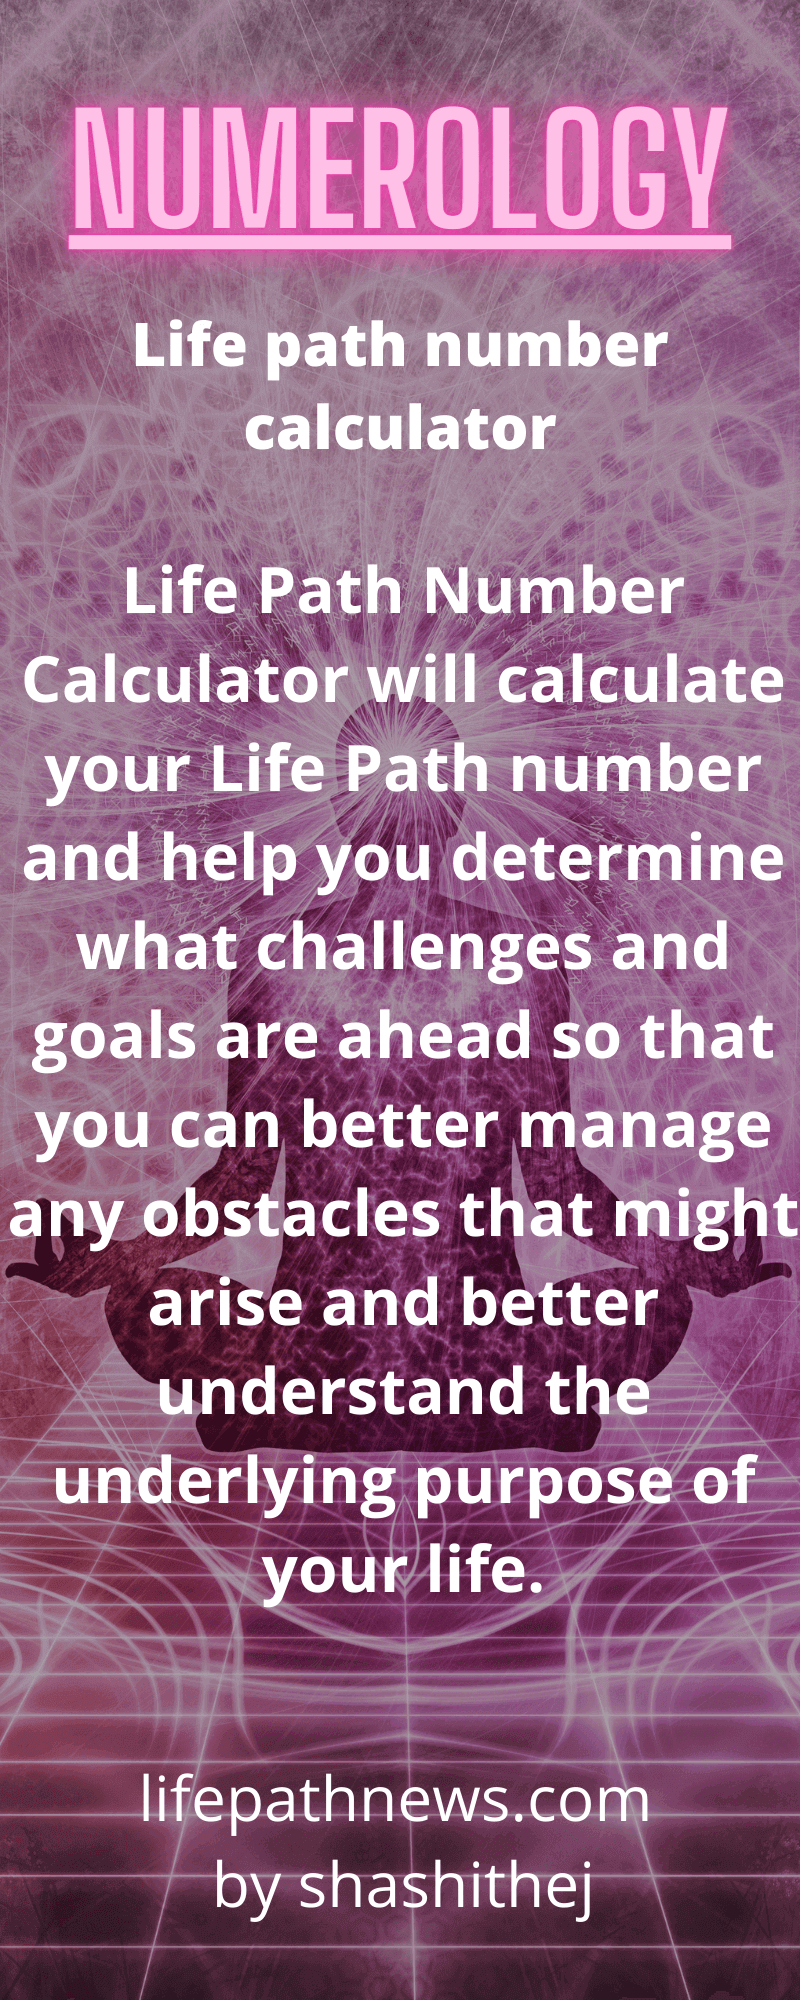 Numerology life path number calculator